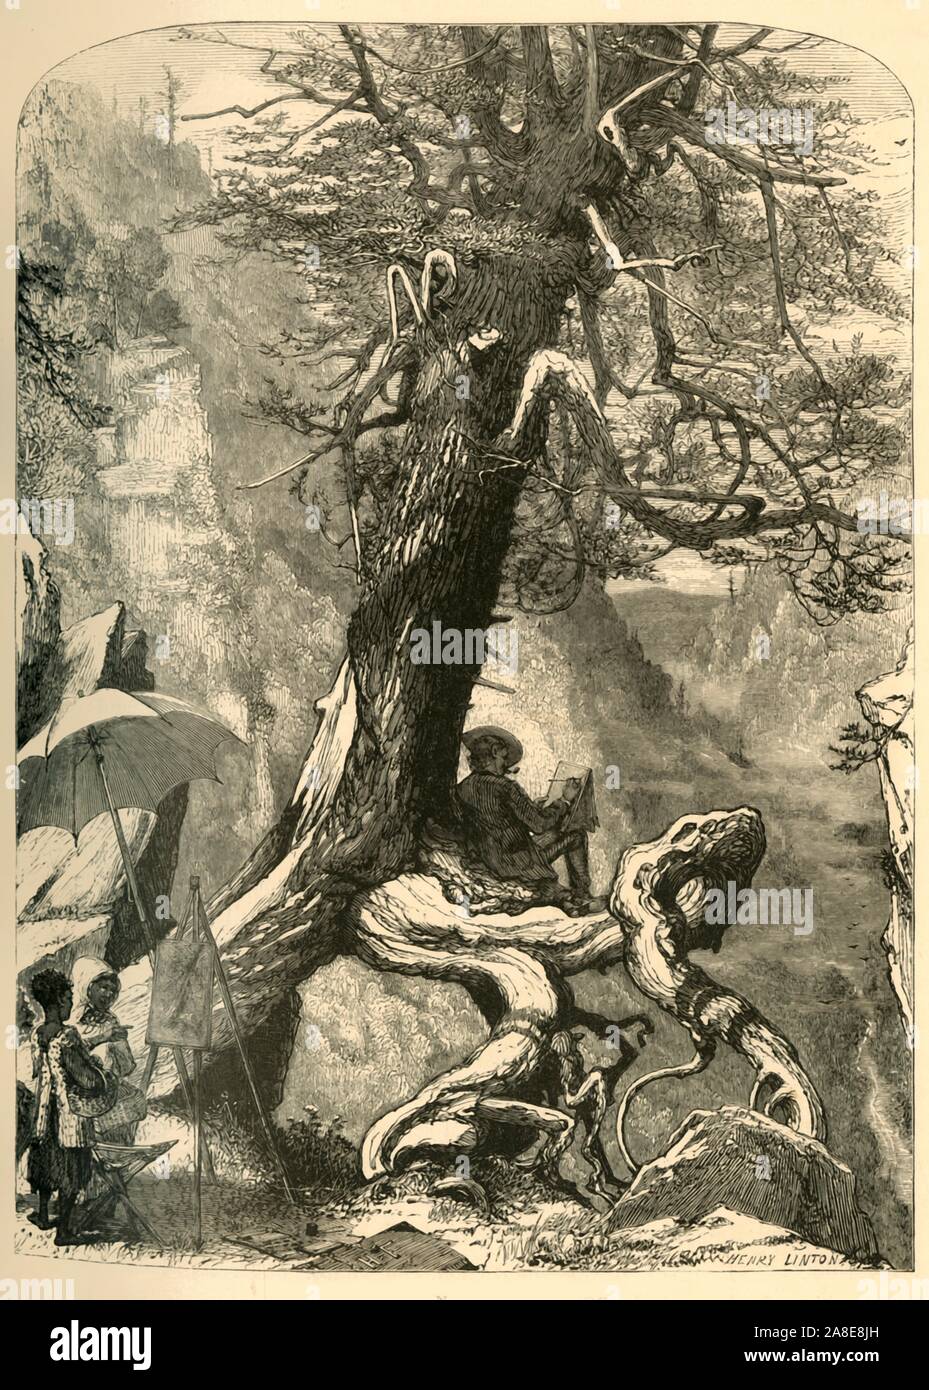 'Above the Natural Bridge', 1872. Artist sketching on a gnarled tree root above Natural Bridge, a rock arch in Virginia, USA. From &quot;Picturesque America; or, The Land We Live In, A Delineation by Pen and Pencil of the Mountains, Rivers, Lakes...with Illustrations on Steel and Wood by Eminent American Artists&quot; Vol. I, edited by William Cullen Bryant. [D. Appleton and Company, New York, 1872] Stock Photo